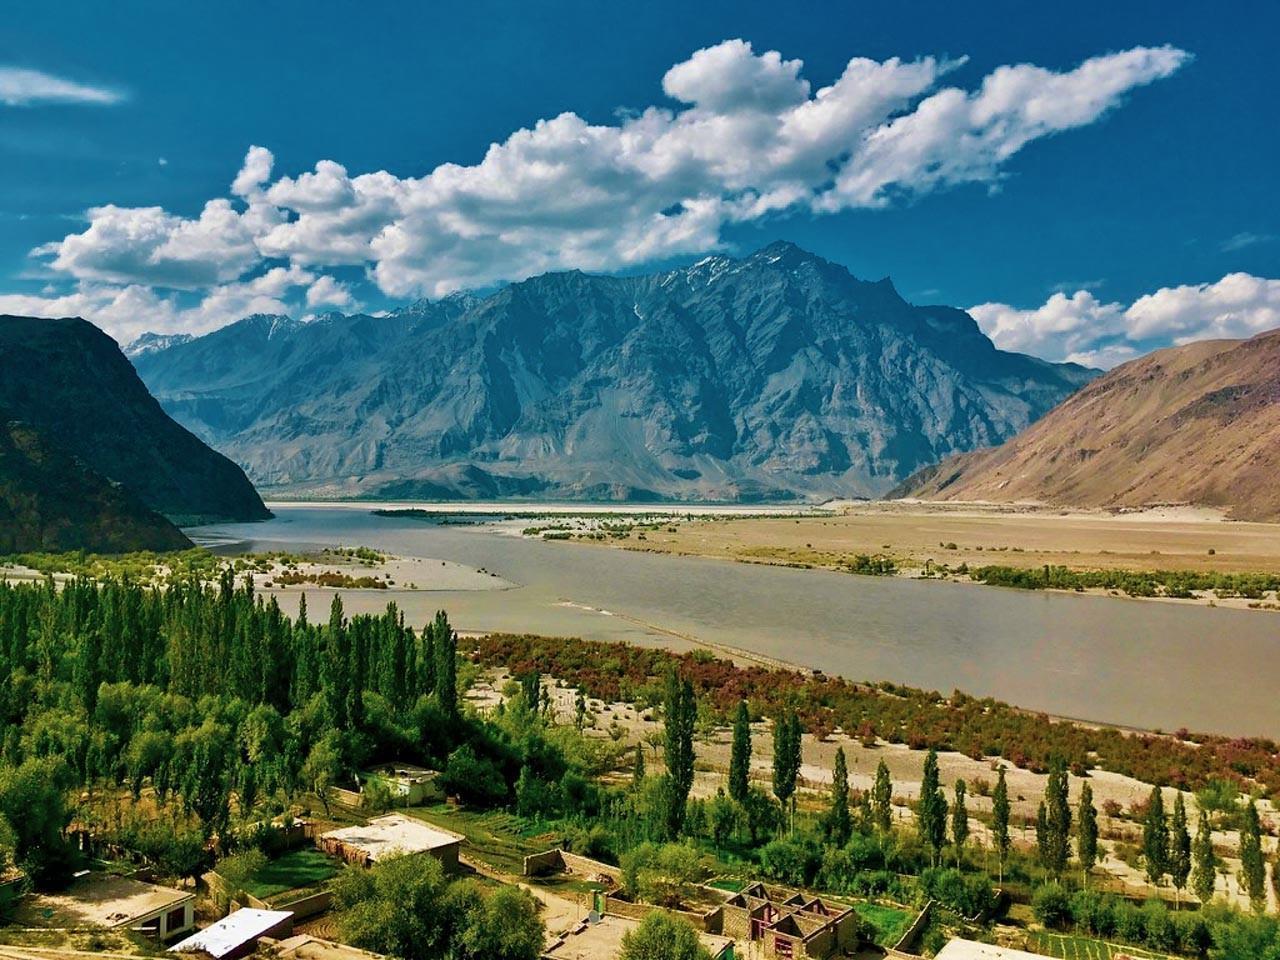 Skardu Valley: Where Mountains, Lakes, and Dreams Converge